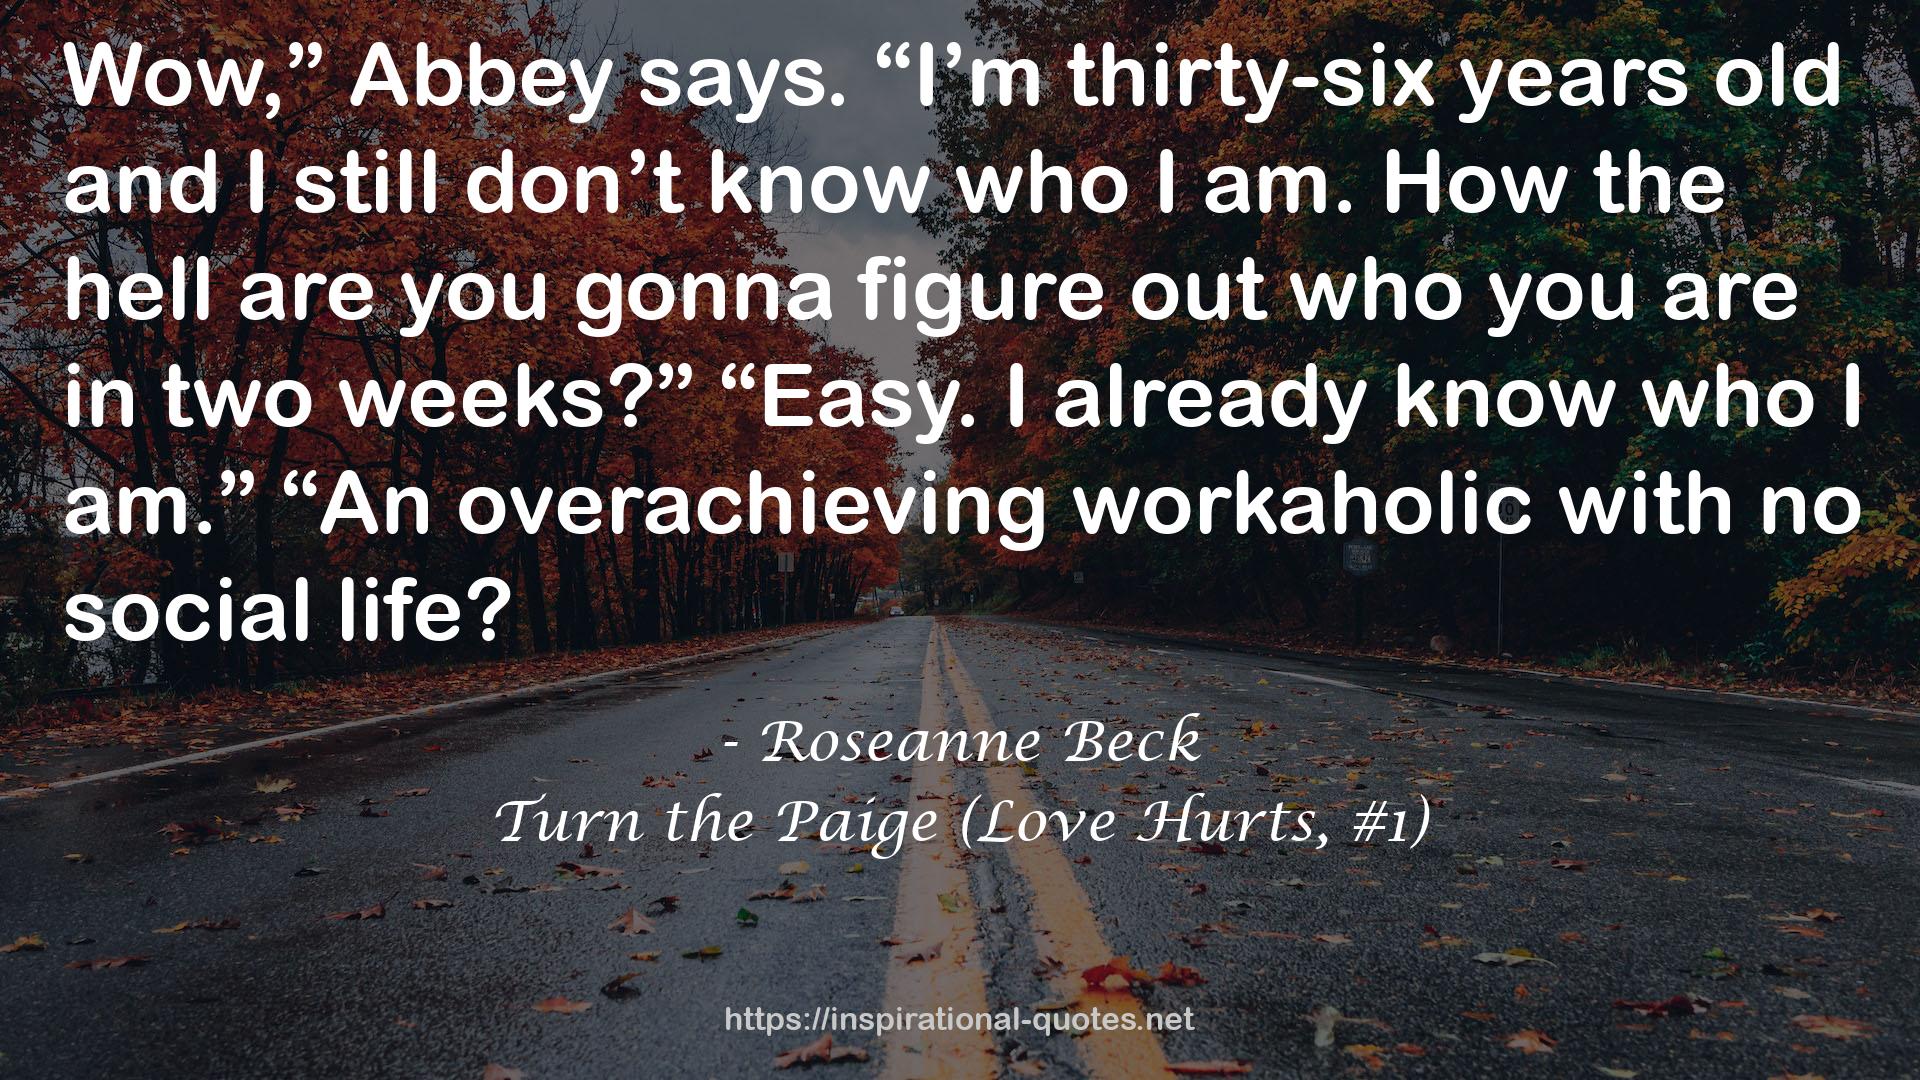 Turn the Paige (Love Hurts, #1) QUOTES